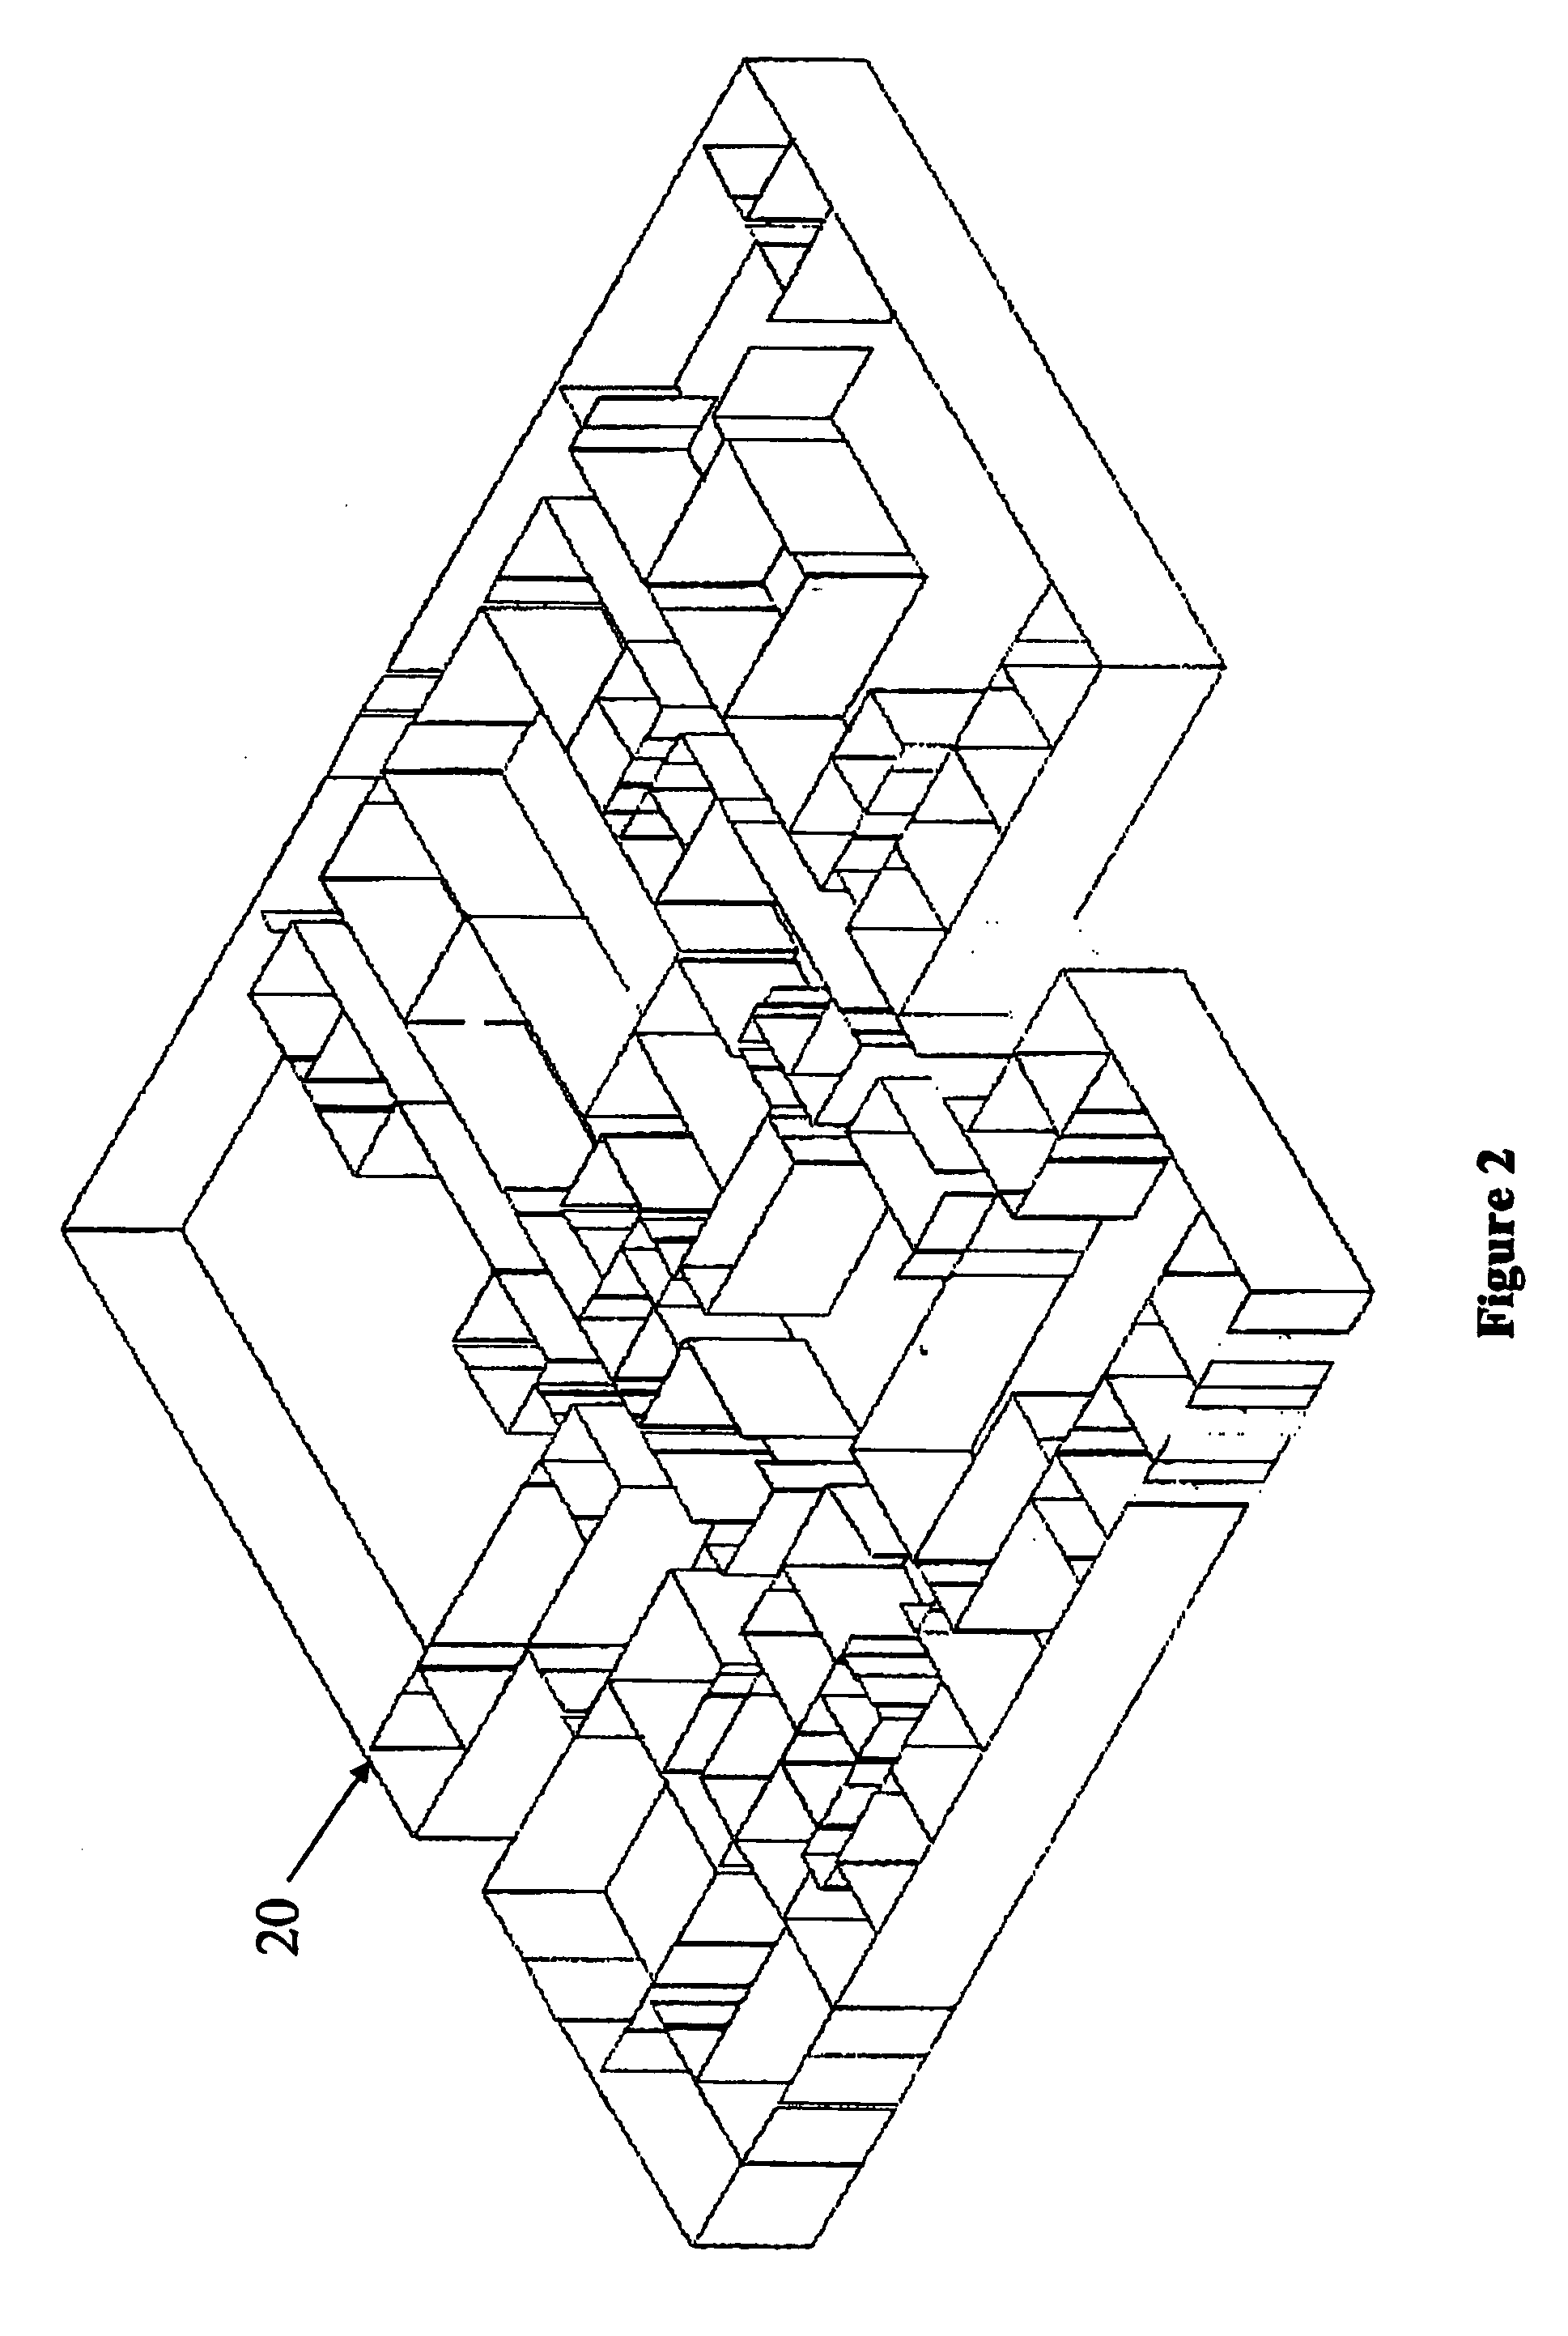 System and method for efficiently visualizing and comparing communication network system performance